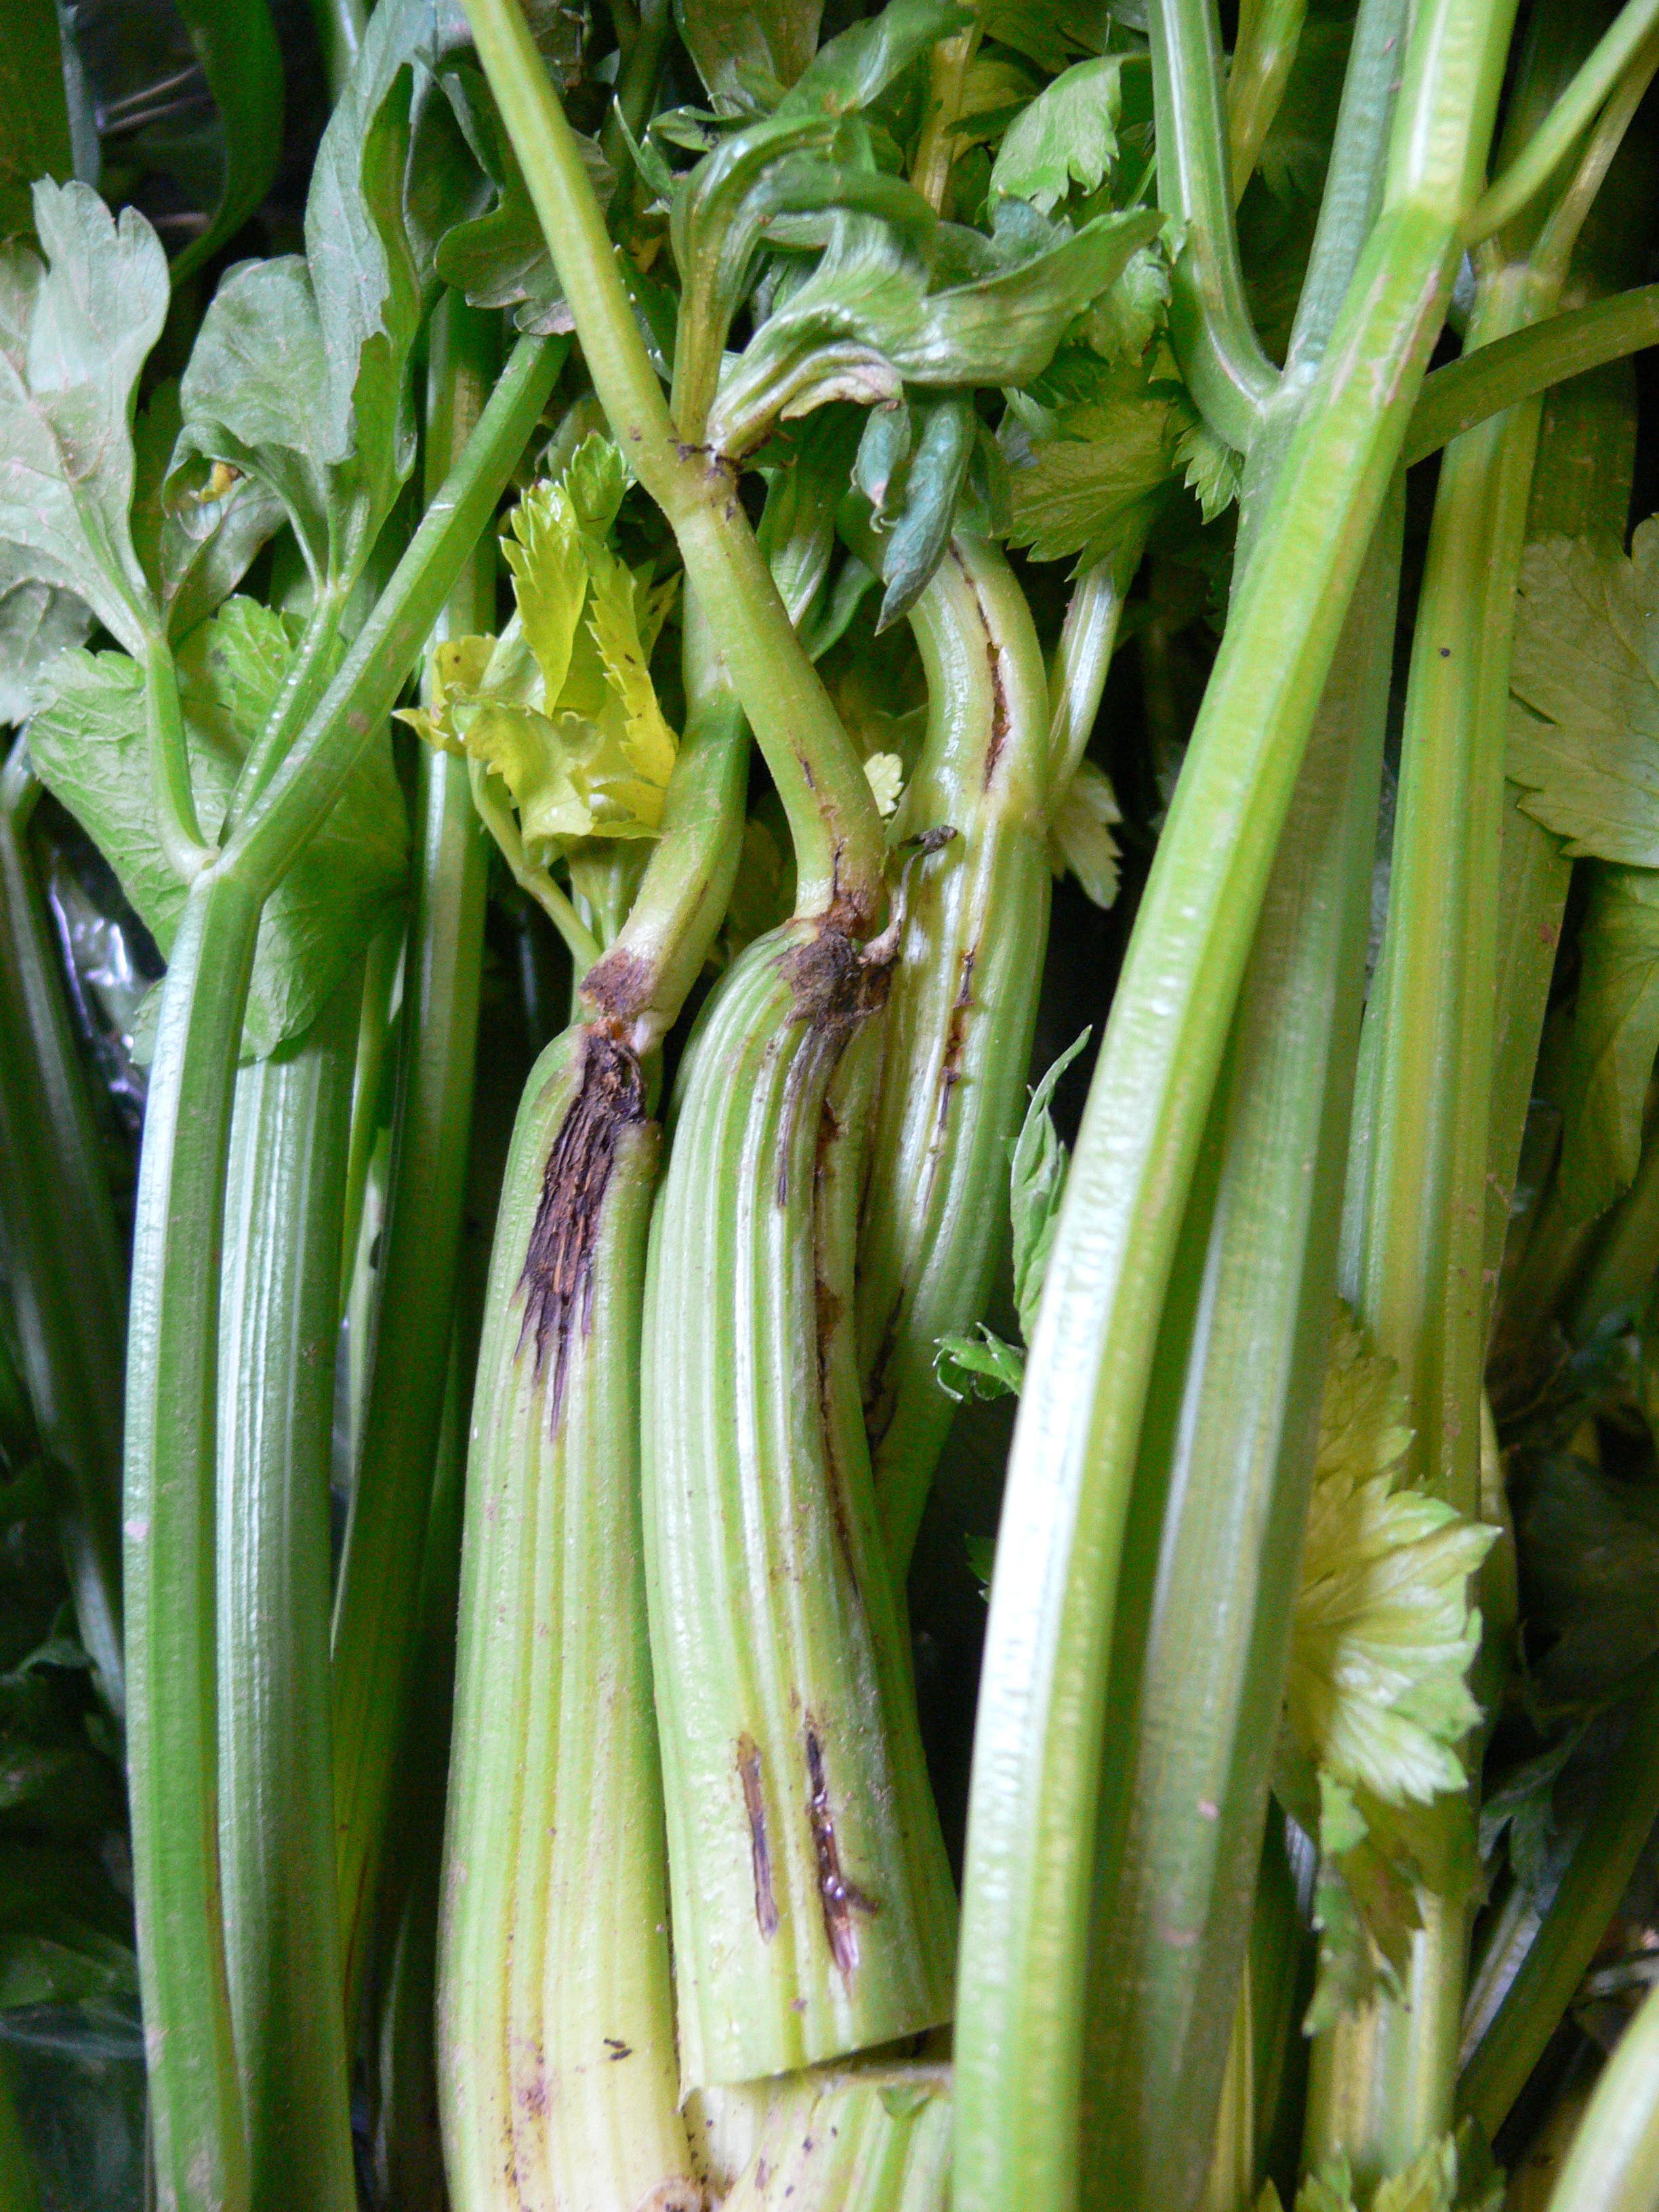 Celery bunch with browned stalks and curled and yellow leaves